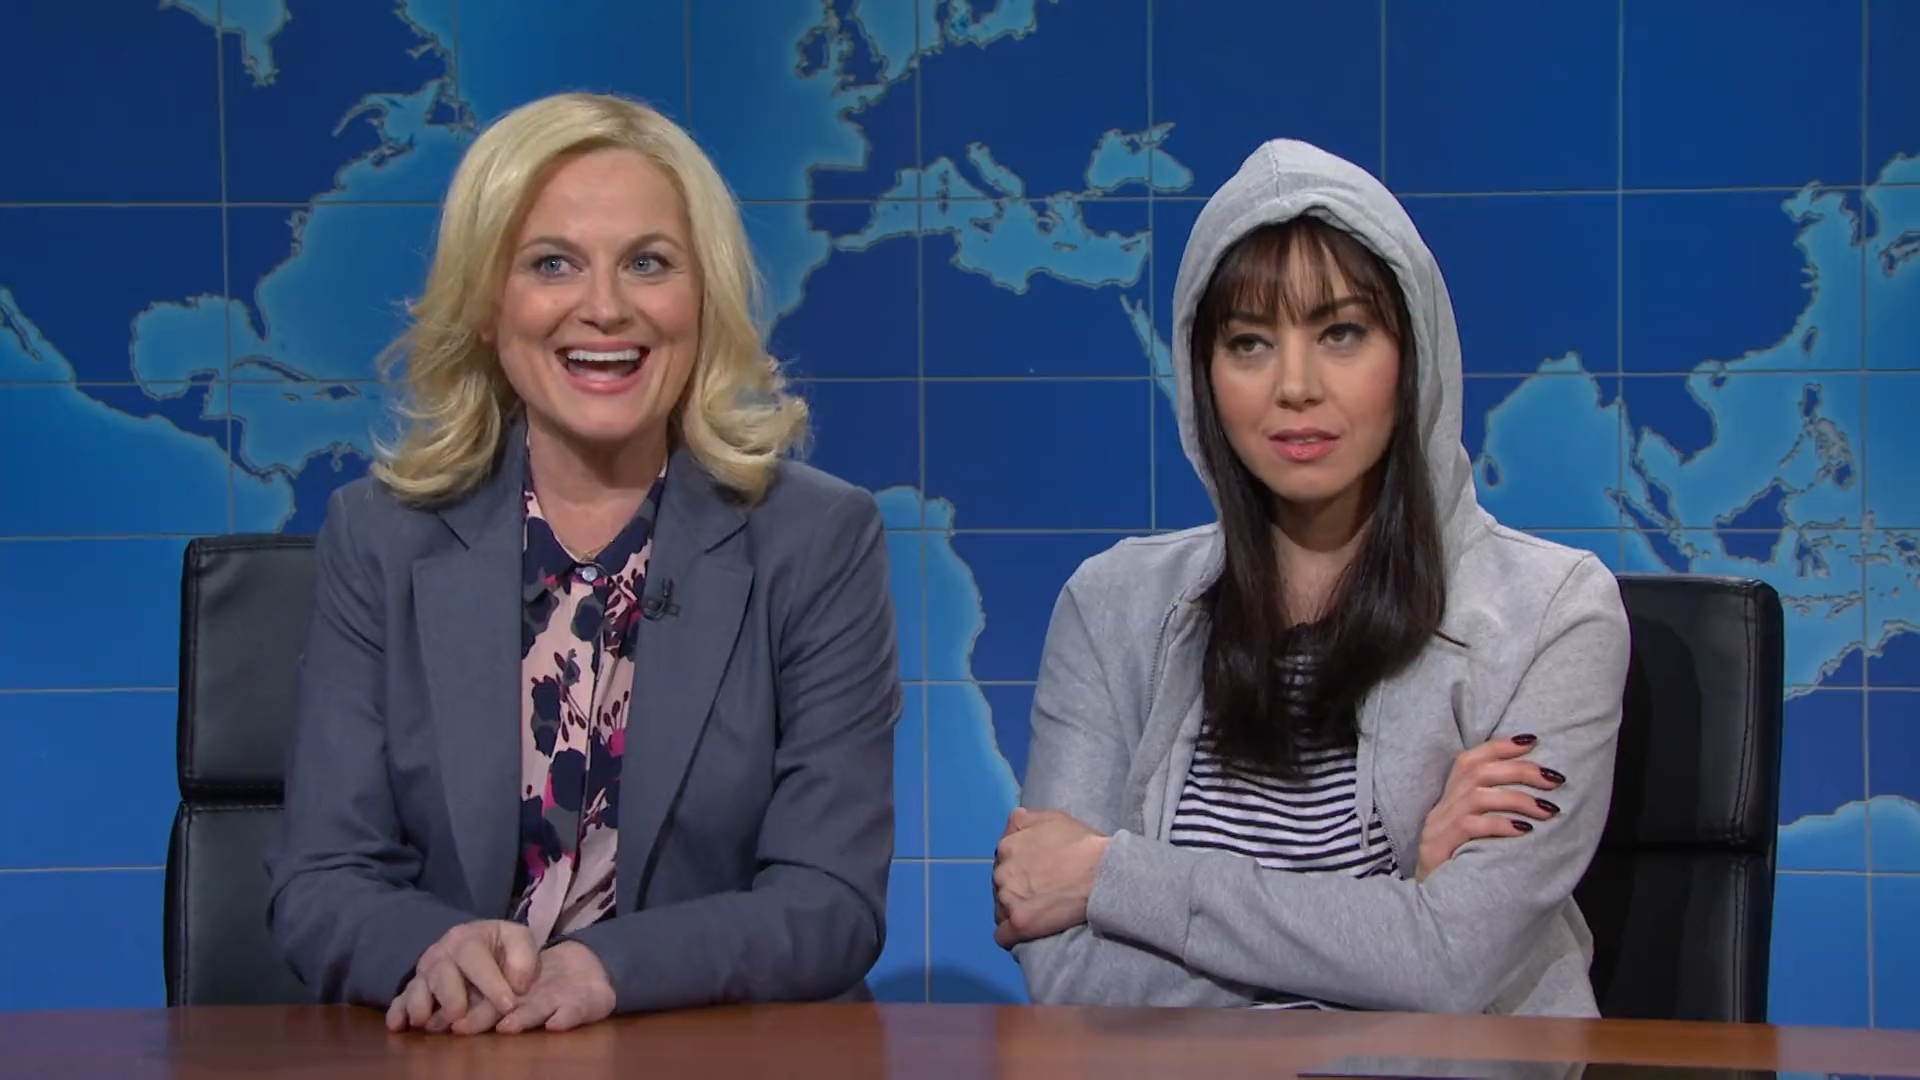 Leslie Knope and April Ludgate (Amy Poehler and Aubrey Plaza) on Saturday Night Live Weekend Update